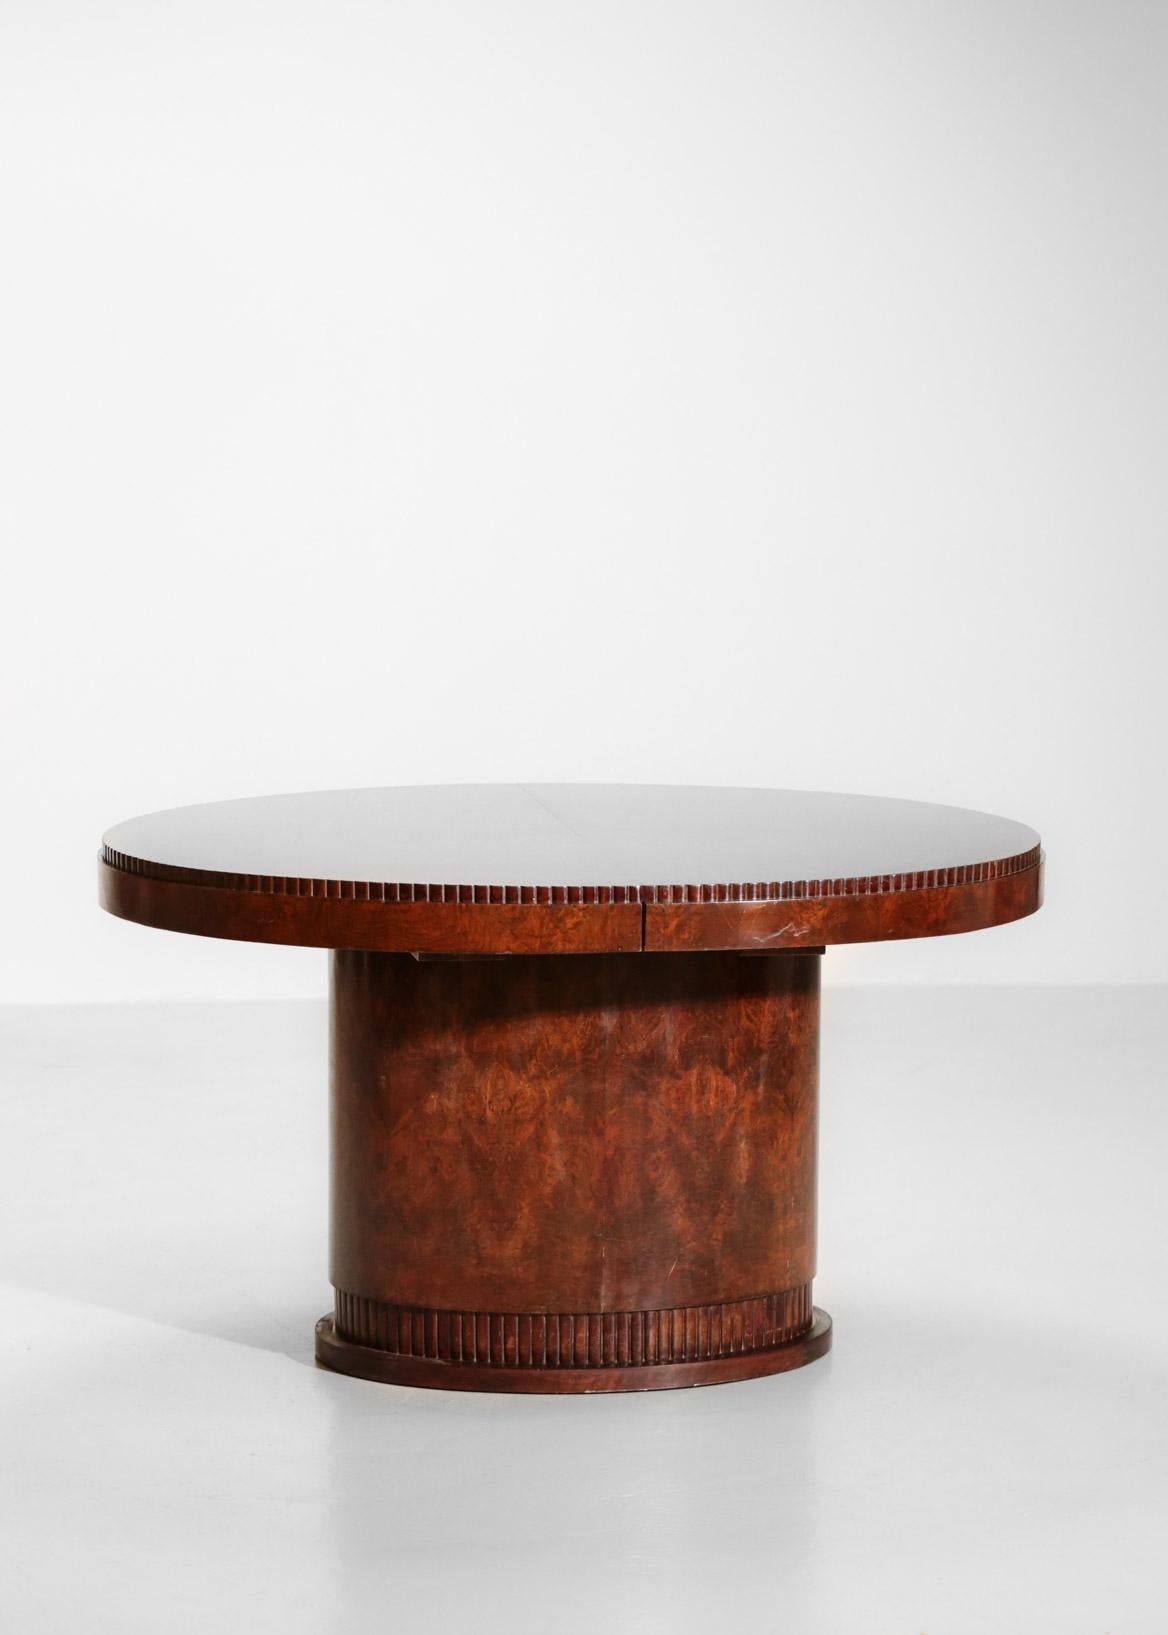 Mid-20th Century French Art Deco Dining Oval Table, Vintage 1930s Modernist Burl Wood